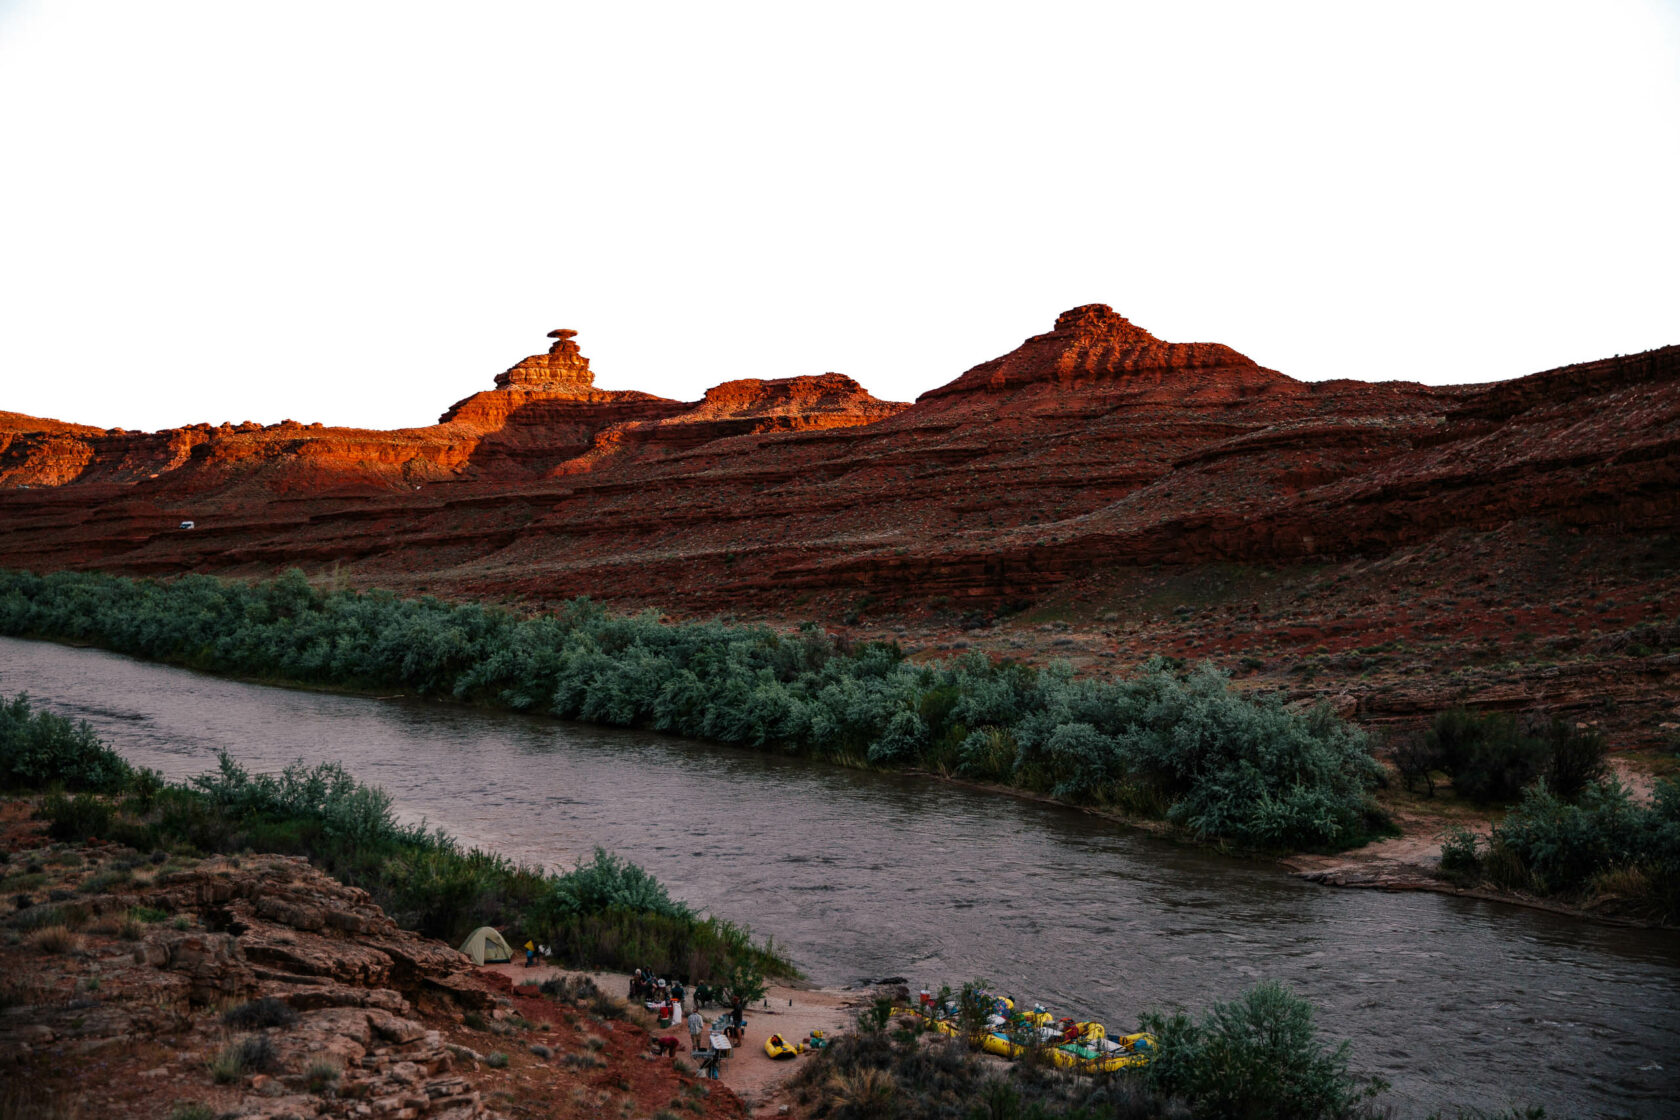 San Juan river with the canyon formations in the background.